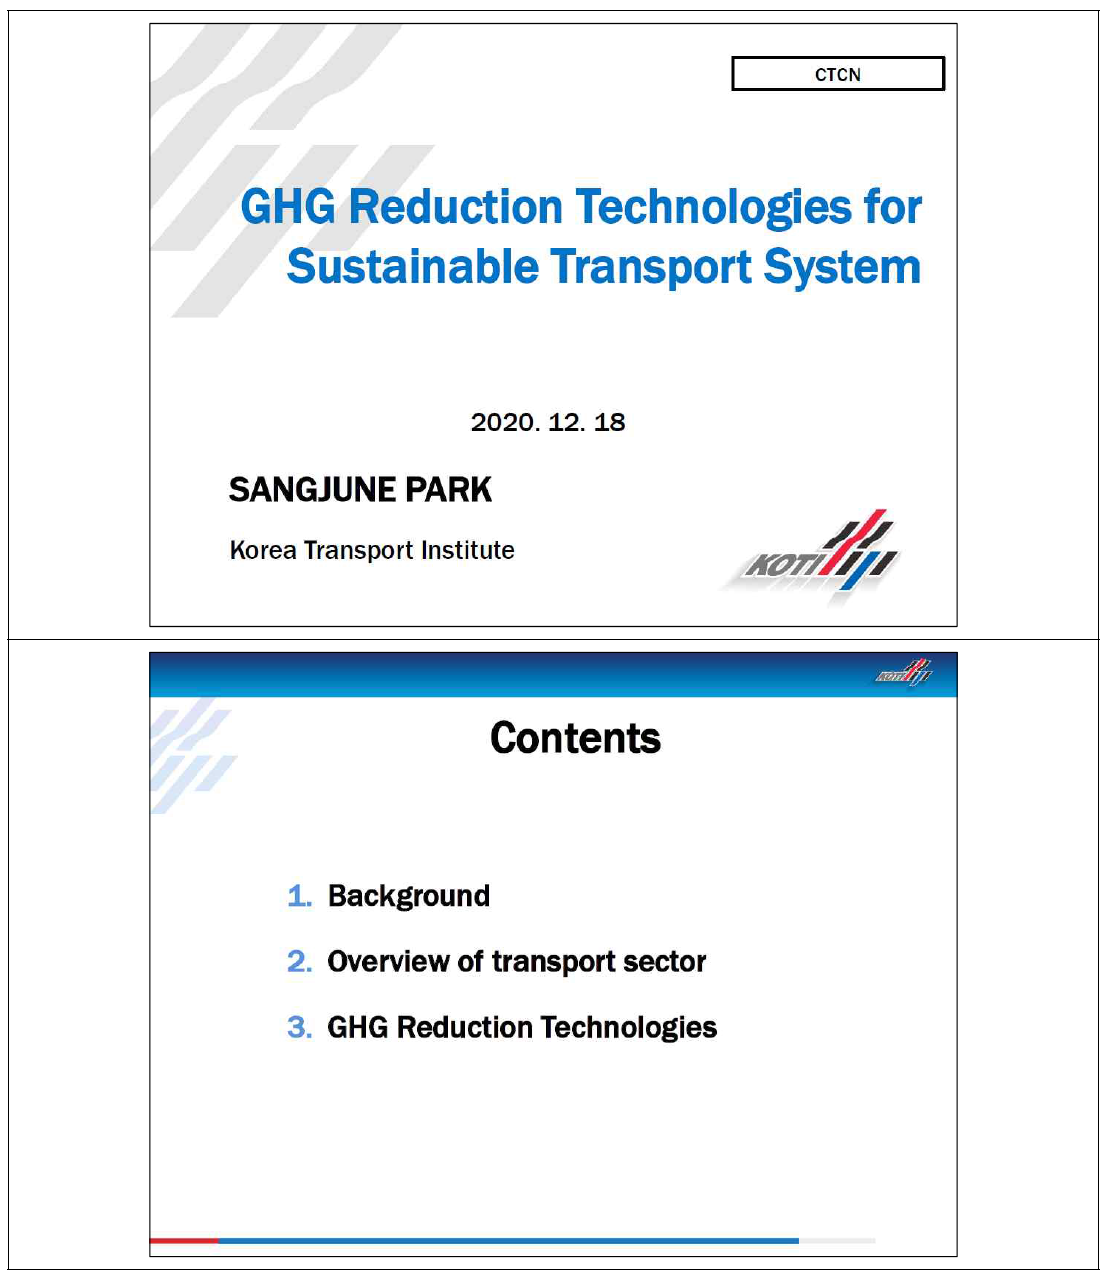 GHG Reduction Technologies for Sustainable Transport System